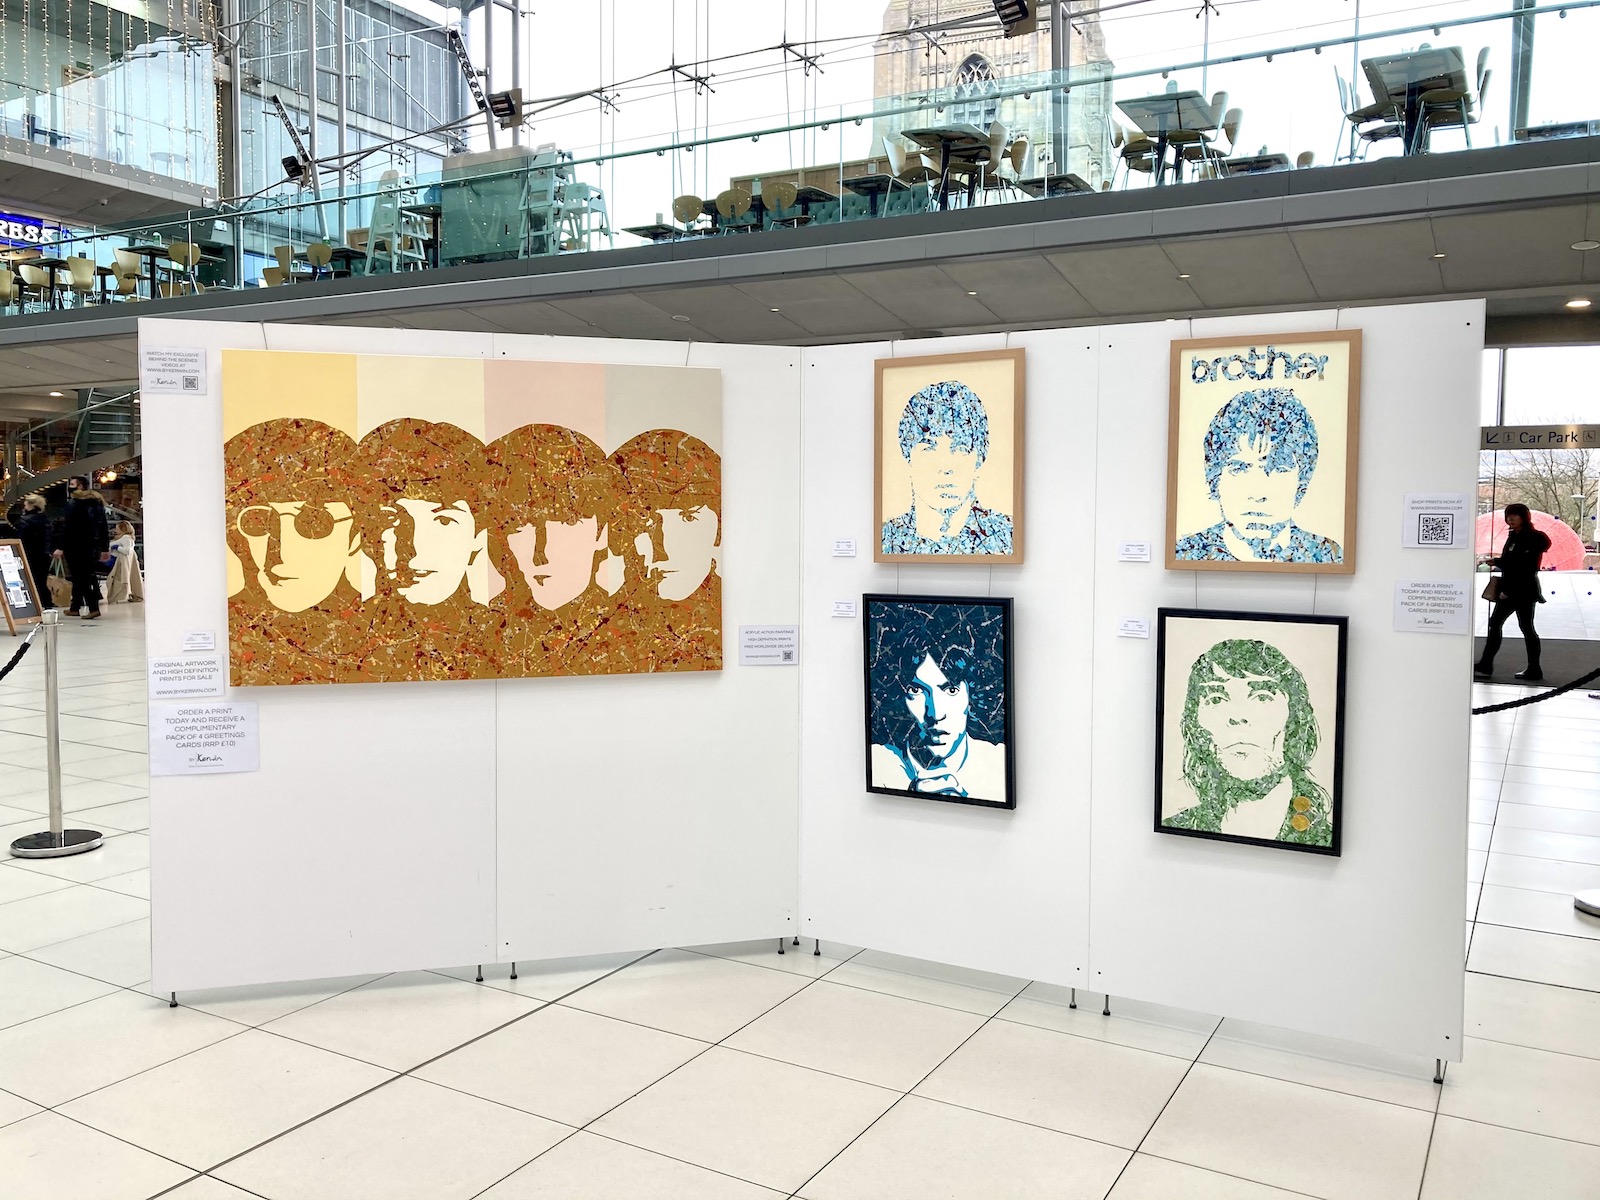 Kerwin Blackburn's Jackson Pollock-inspired pop art music paintings on display in his debut art exhibition at The Forum, Norwich December 2020 | By Kerwin prints | The Beatles | Oasis | Liam Gallagher | Ian Brown | Richard Ashcroft The Verve